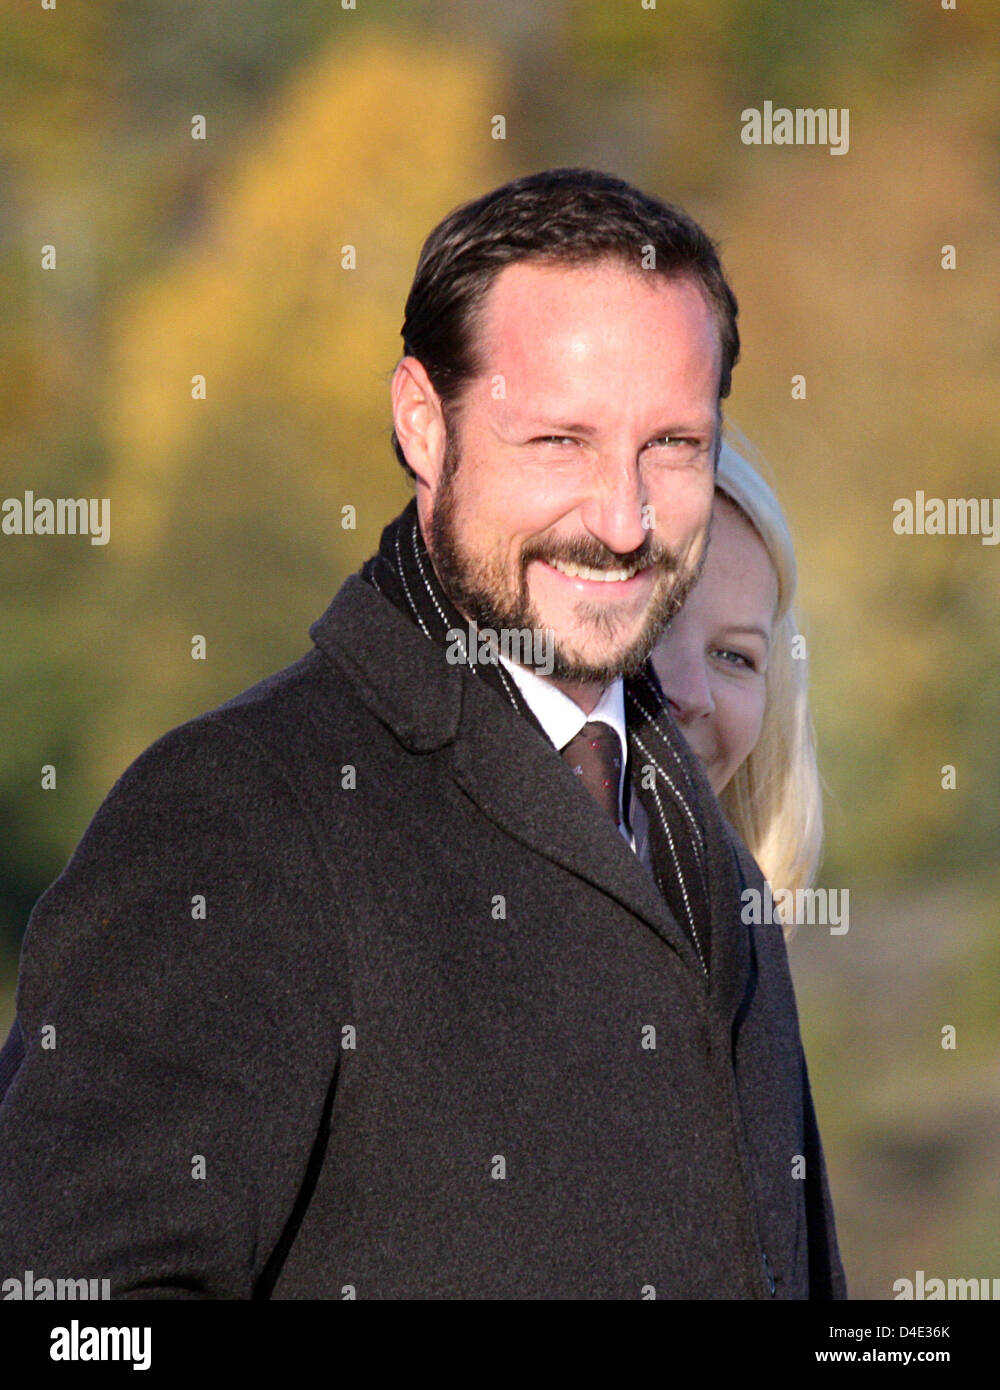 Crown Prince Haakon of Norway visits the Telemark region town Kragero Norway, 09 October 2008. The Crown Prince Couple is on a three-day tour through the country. Photo: Albert Nieboer (NETHERLANDS OUT) Stock Photo